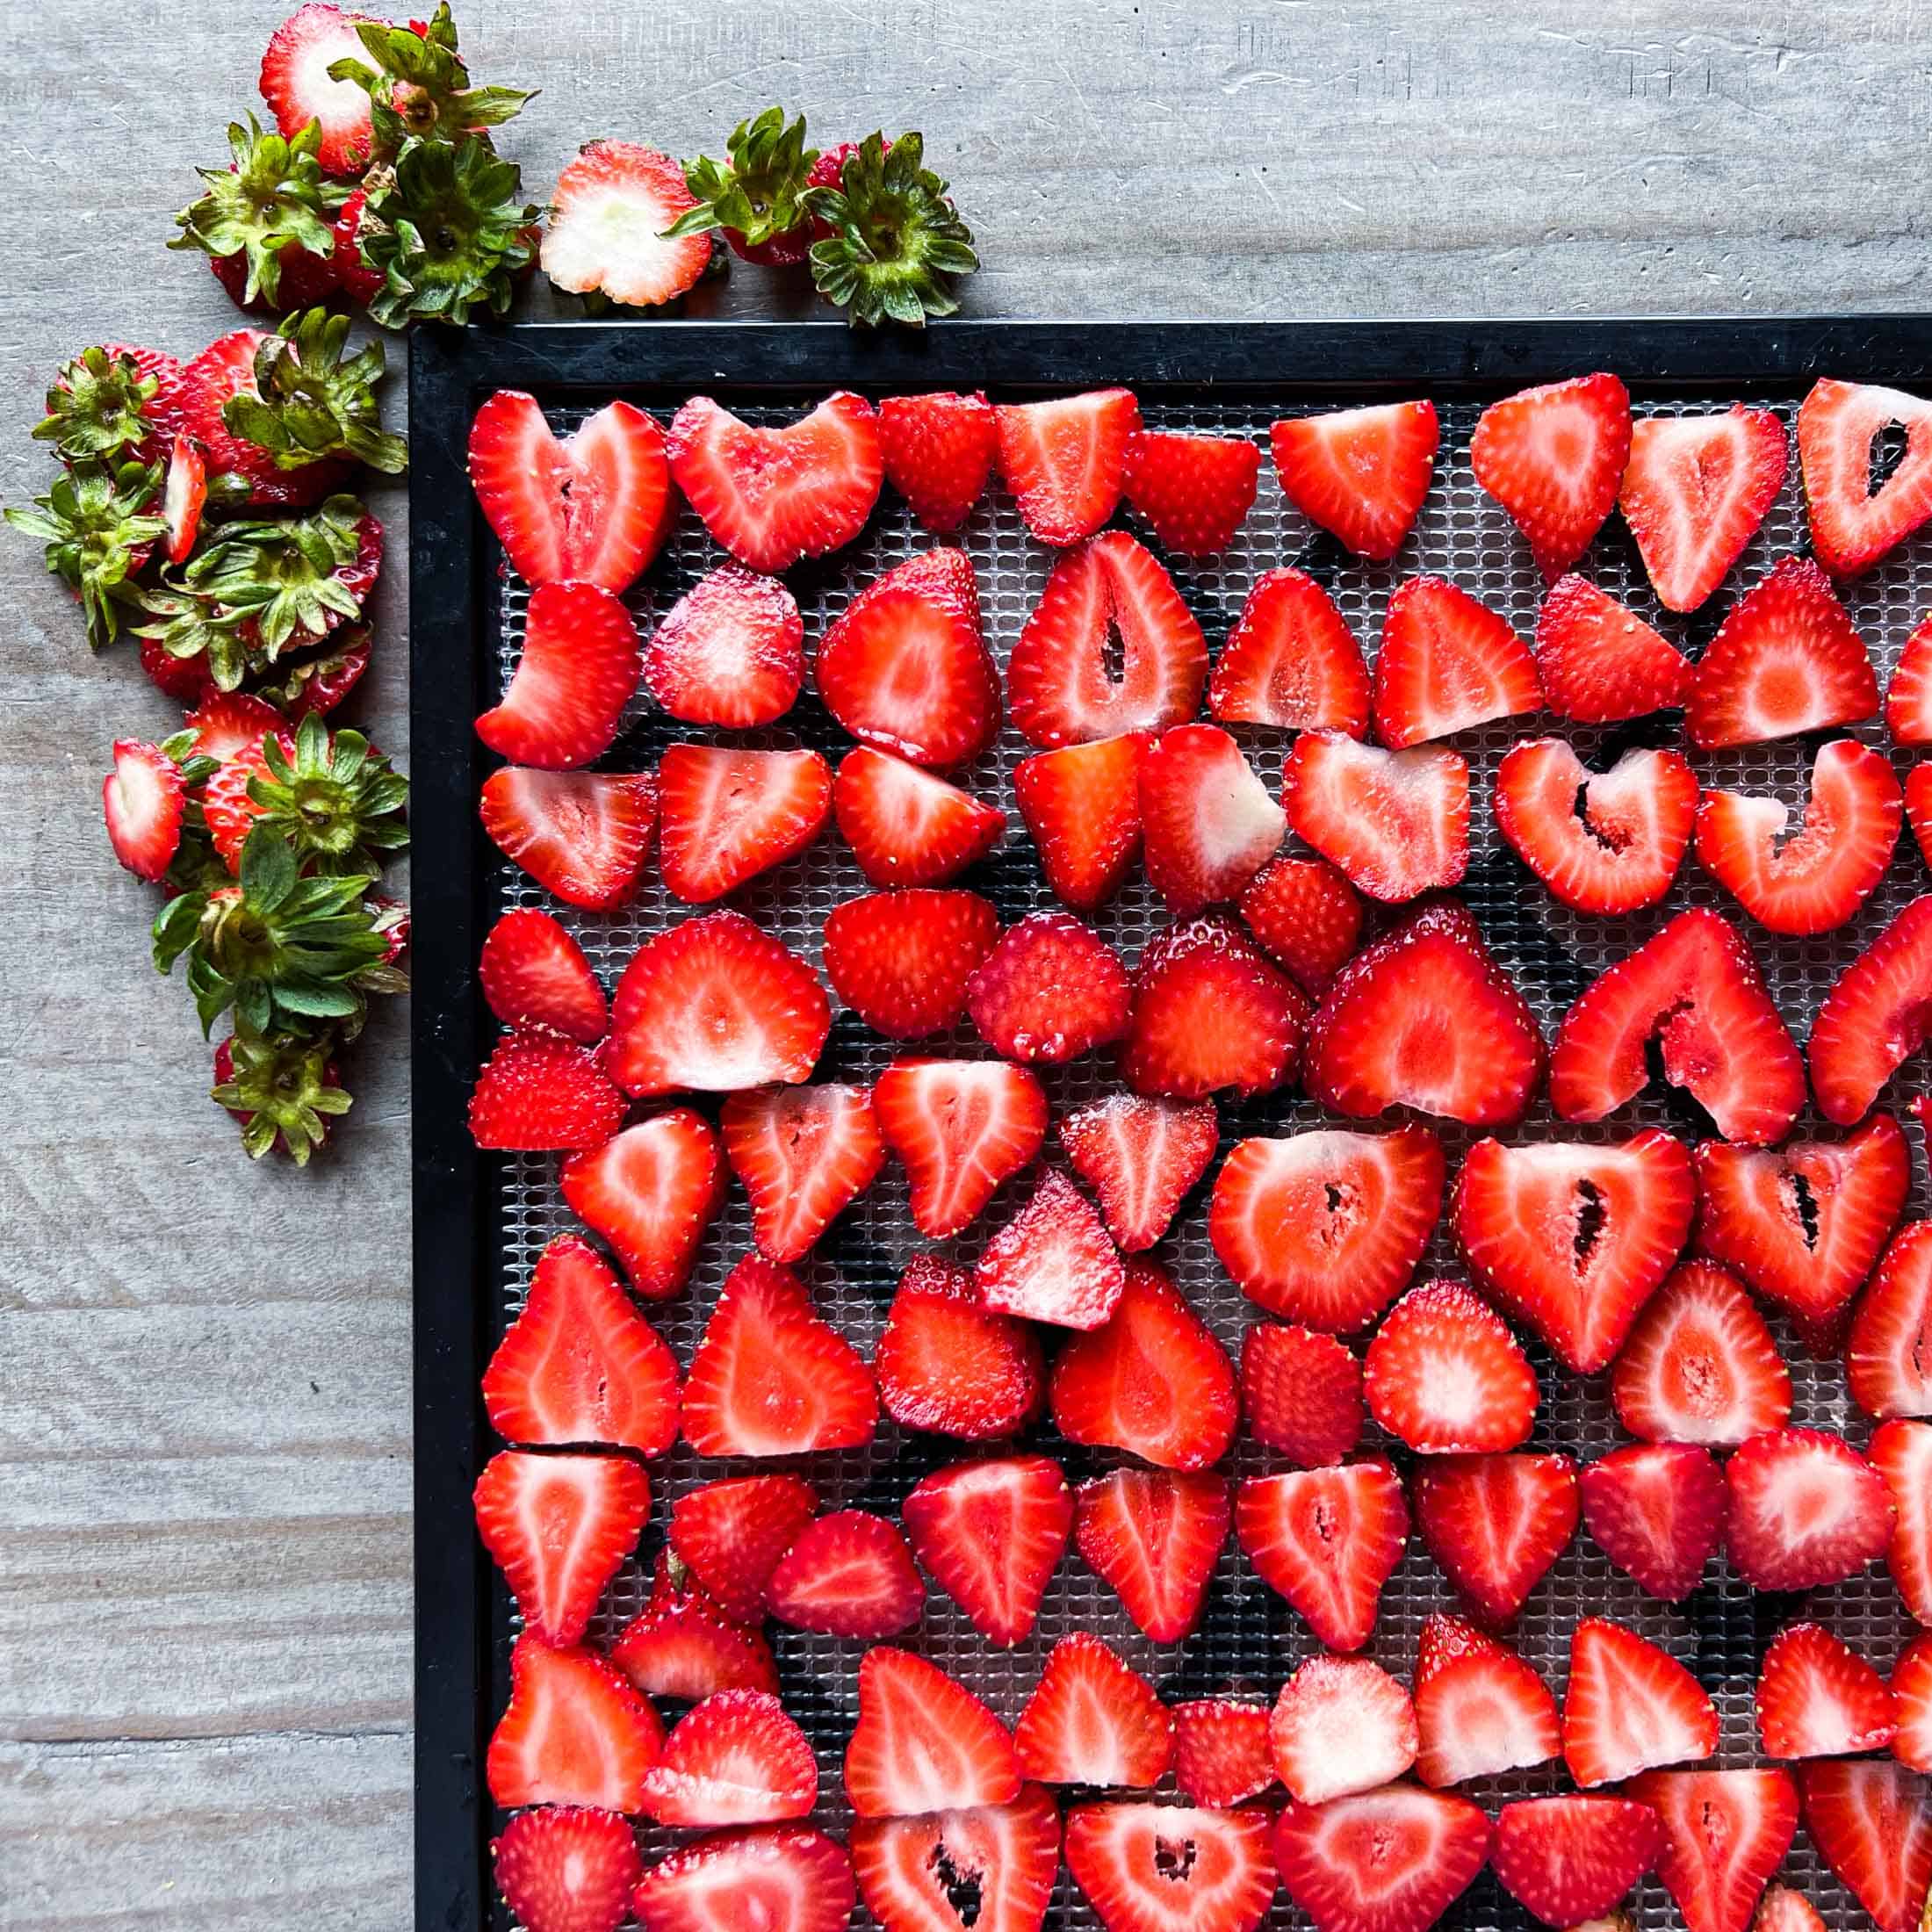 Fresh strawberries sliced on a dehydrator tray in a single layer.